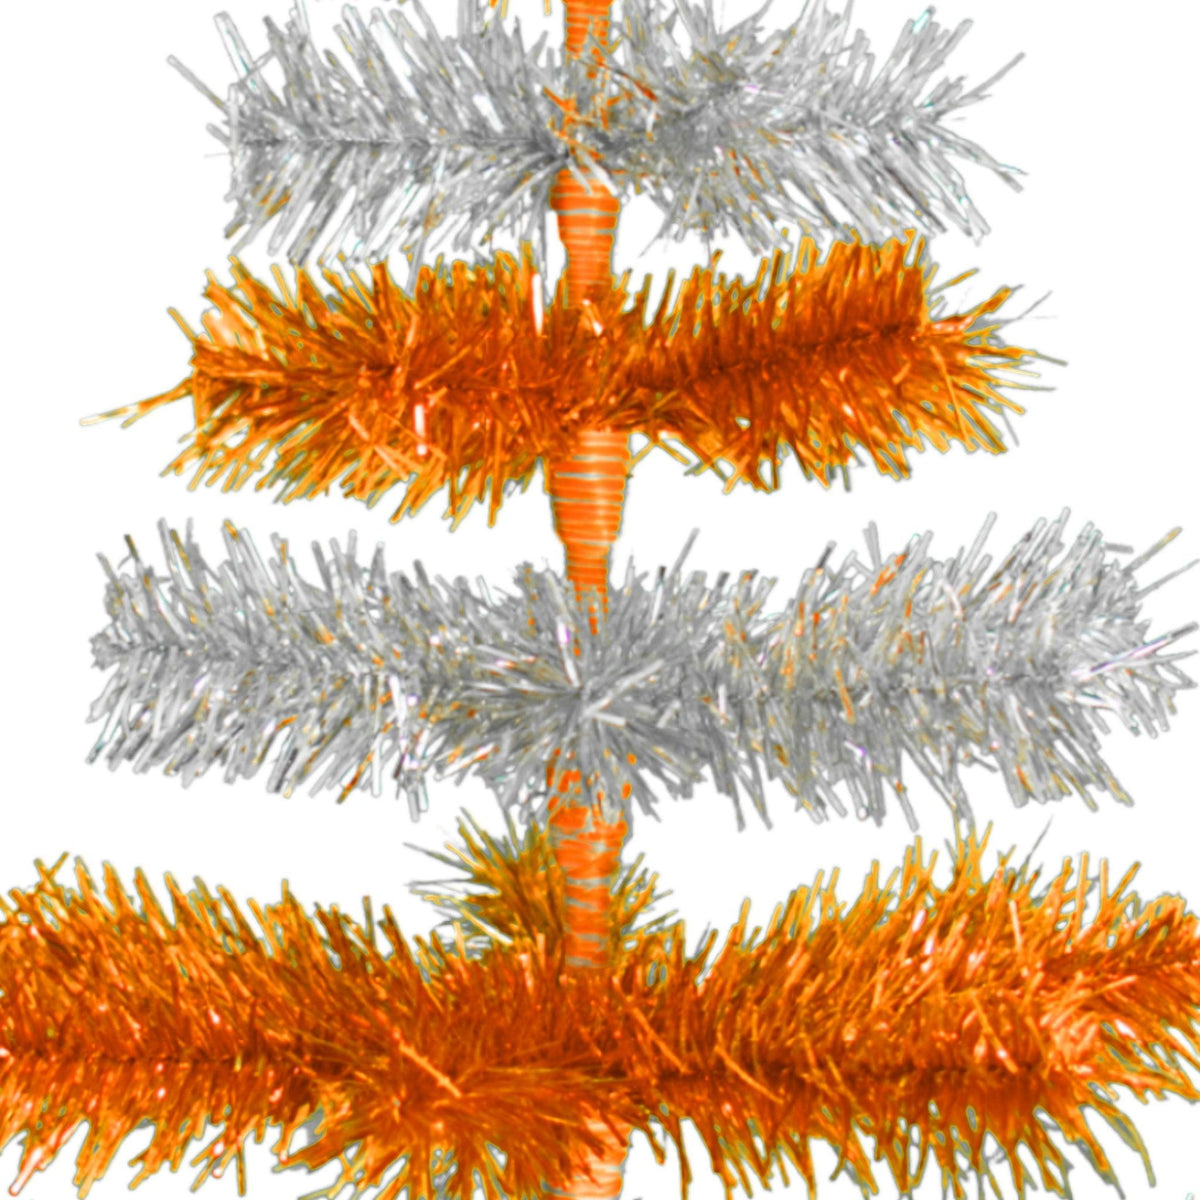 Orange & Silver Layered Tinsel Christmas Trees!    Decorate for the holidays with a Shiny Orange and Metallic Silver retro-style Christmas Tree.  On sale now at leedisplay.com